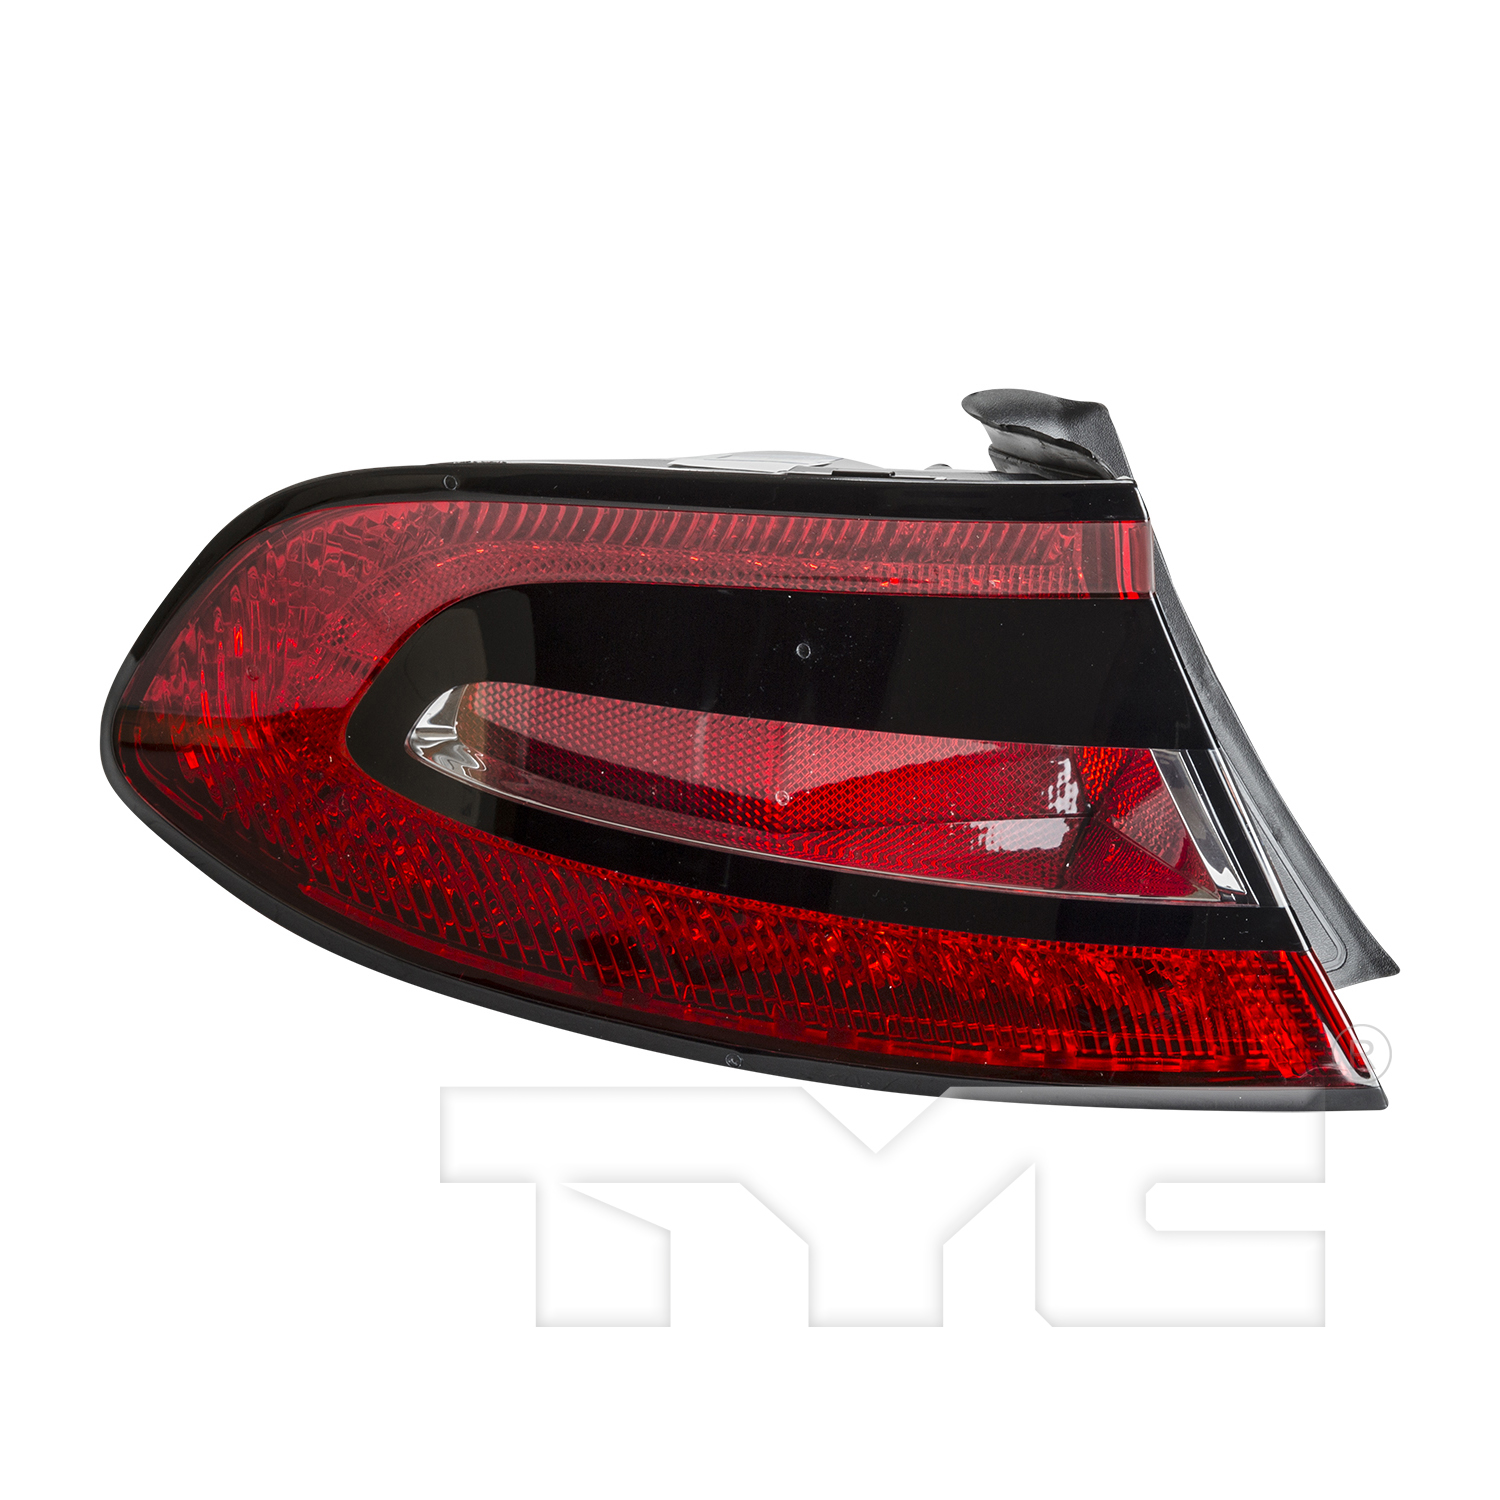 Aftermarket TAILLIGHTS for DODGE - DART, DART,13-16,LT Taillamp assy